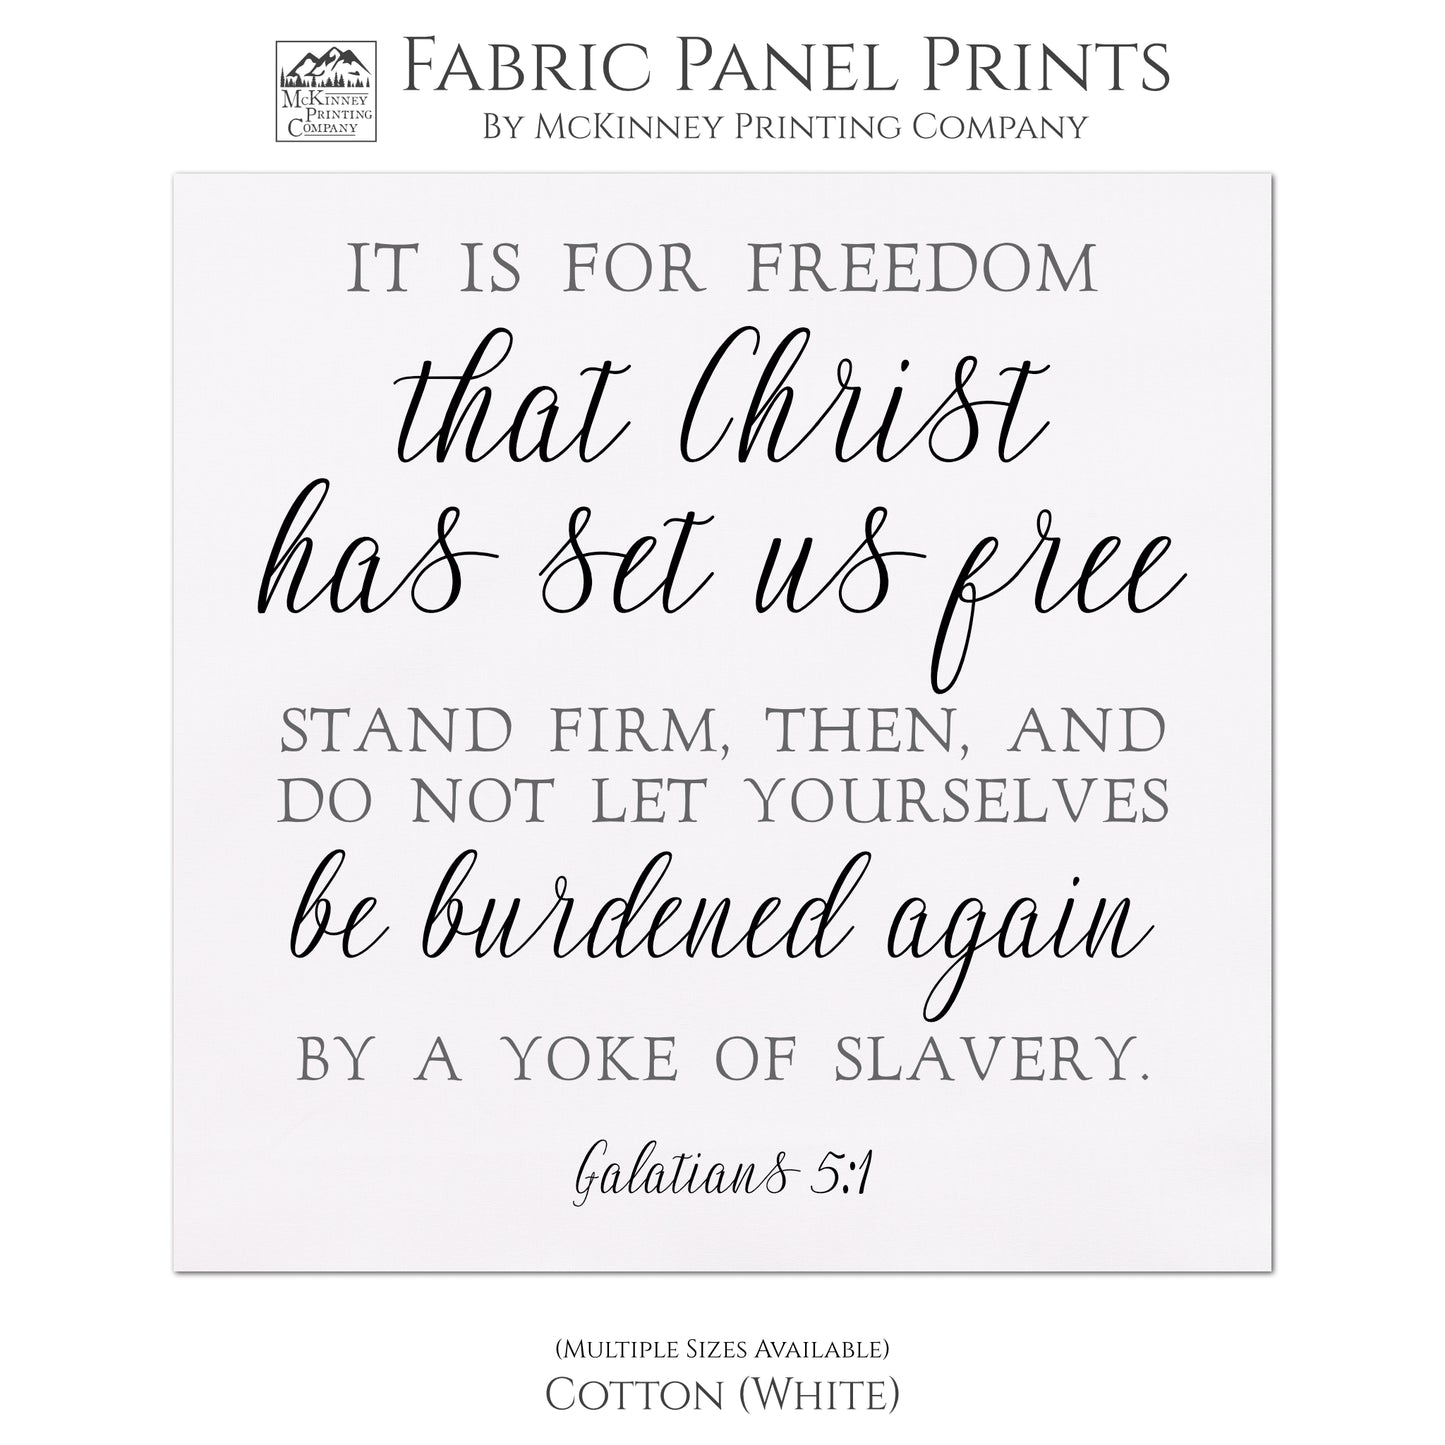 It is for freedom that Christ has set us free stand firm, then, and do not let yourselves be burdened again by a yoke of slavery. Galatians 5 1, Fabric Panel Print, Quilt Block, Large, Small - Cotton, White